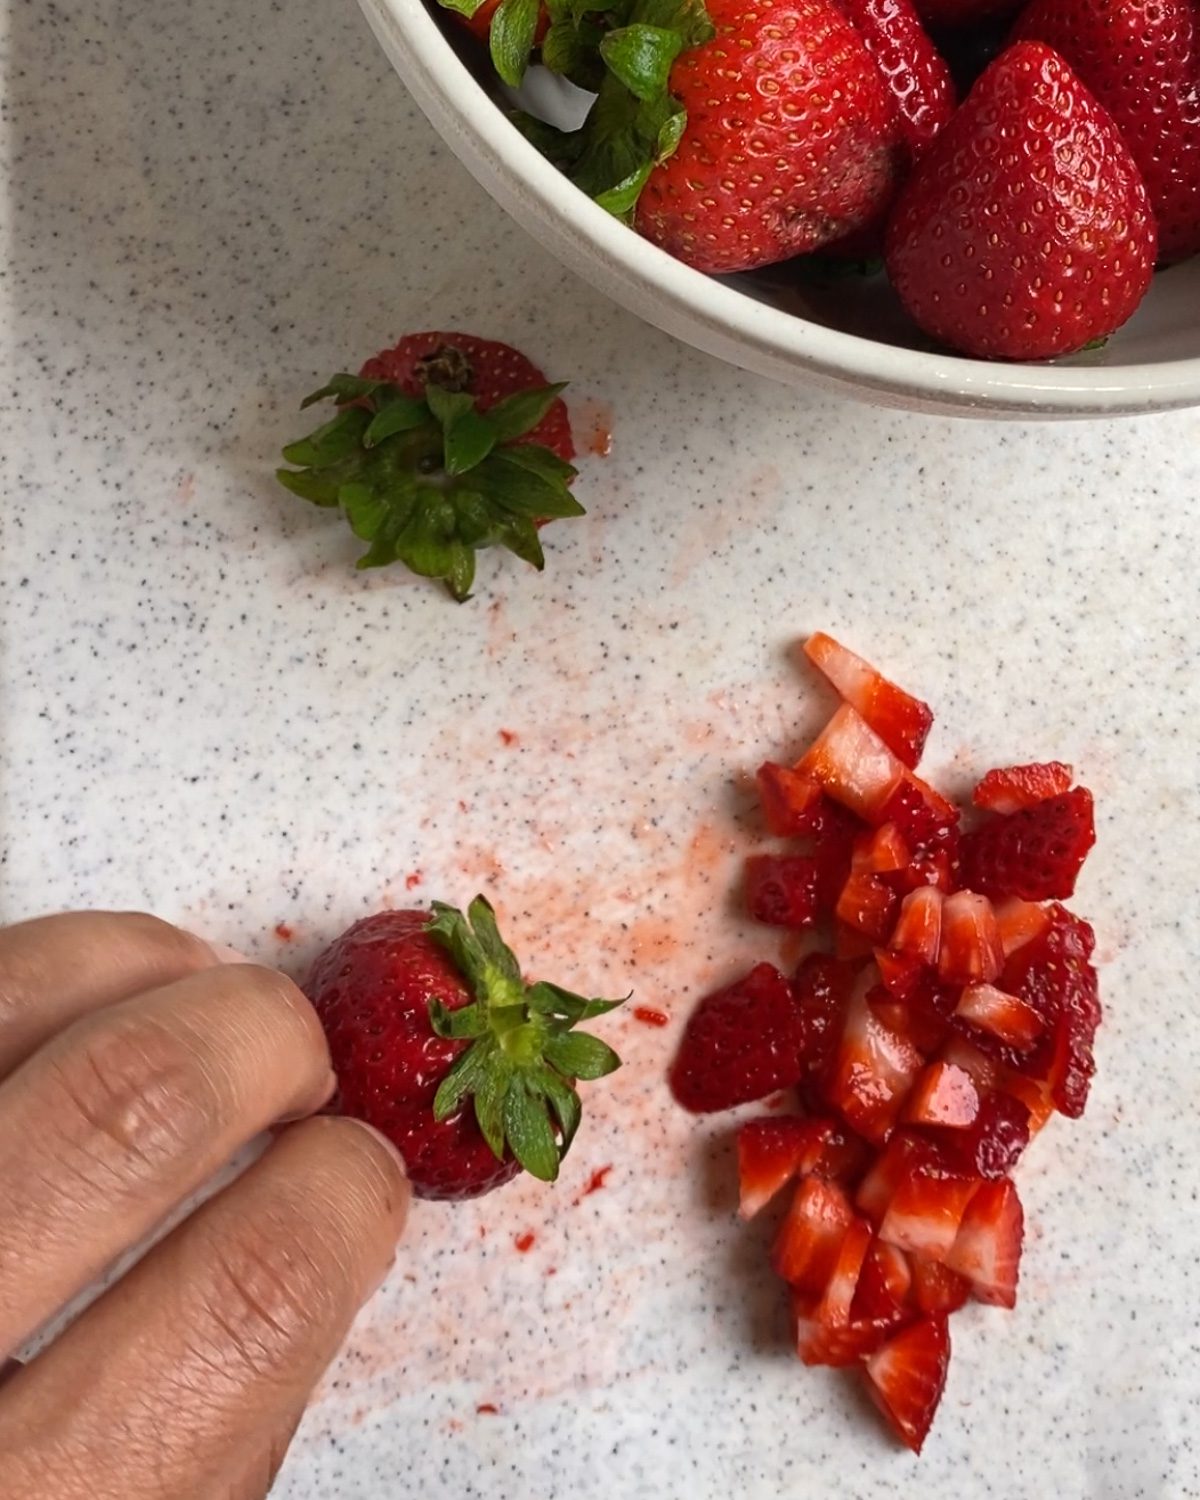 process of cutting strawberries on a white surface